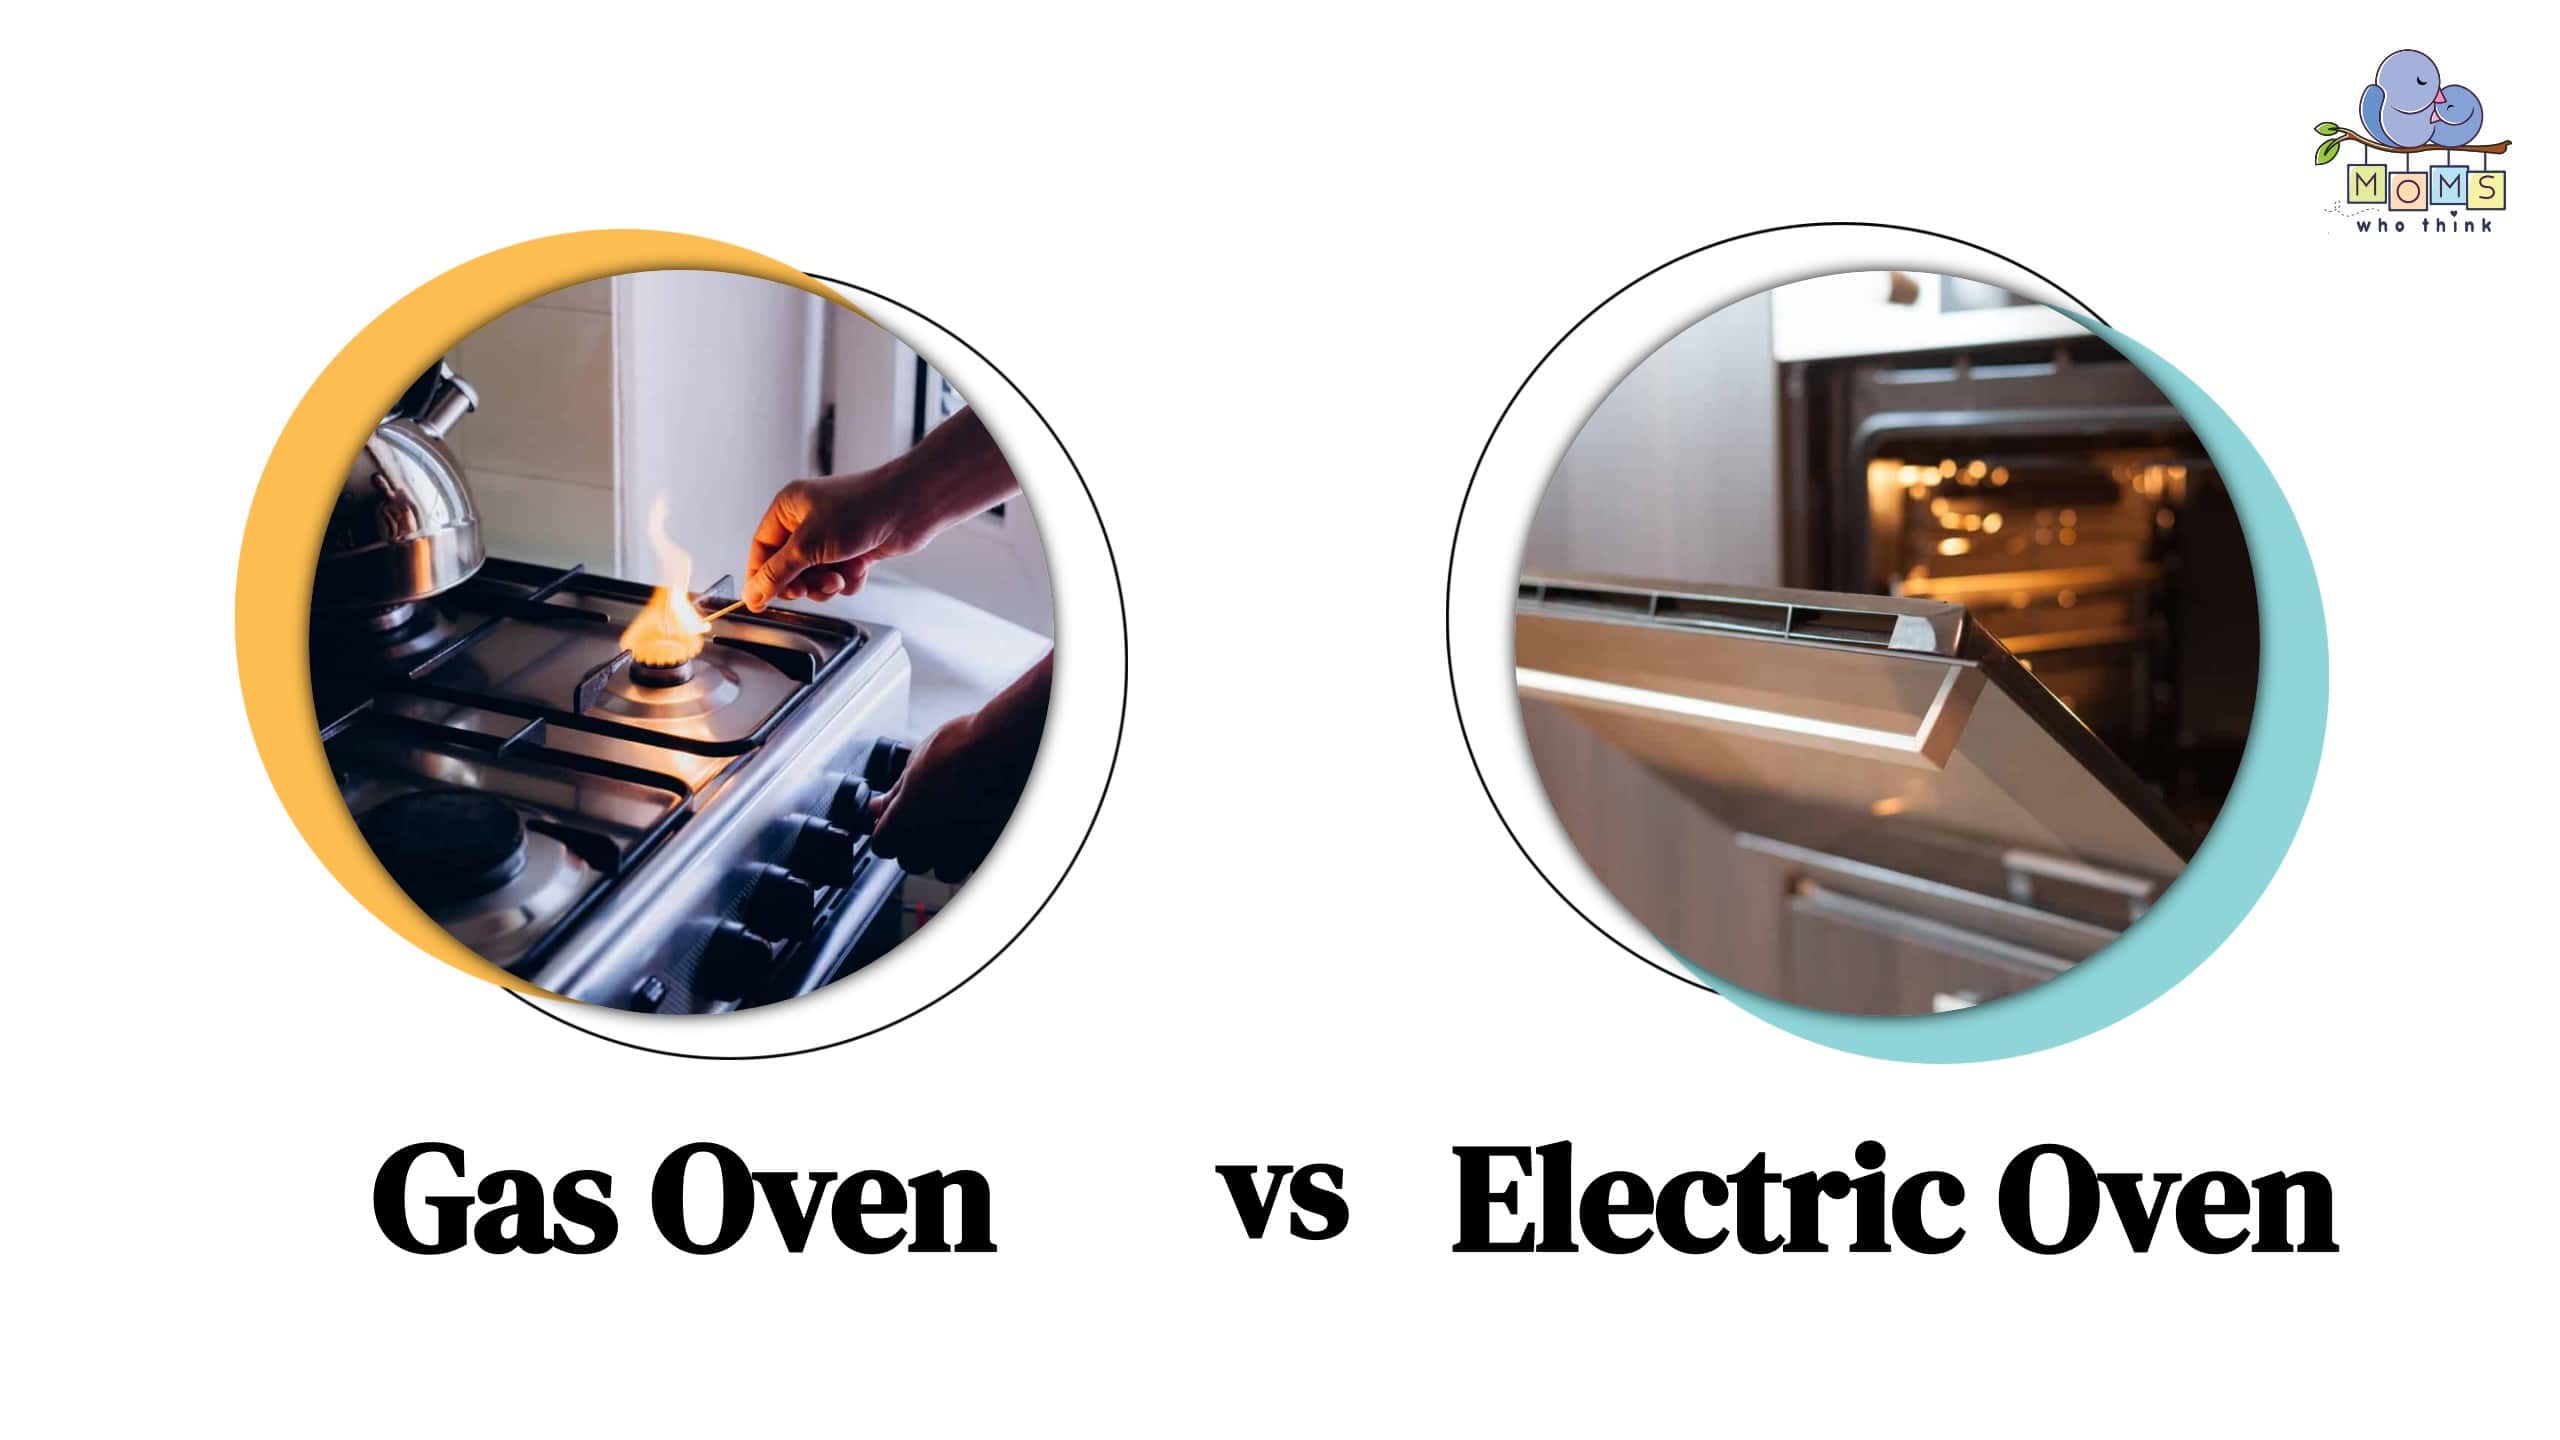 Gas Oven vs Electric Oven